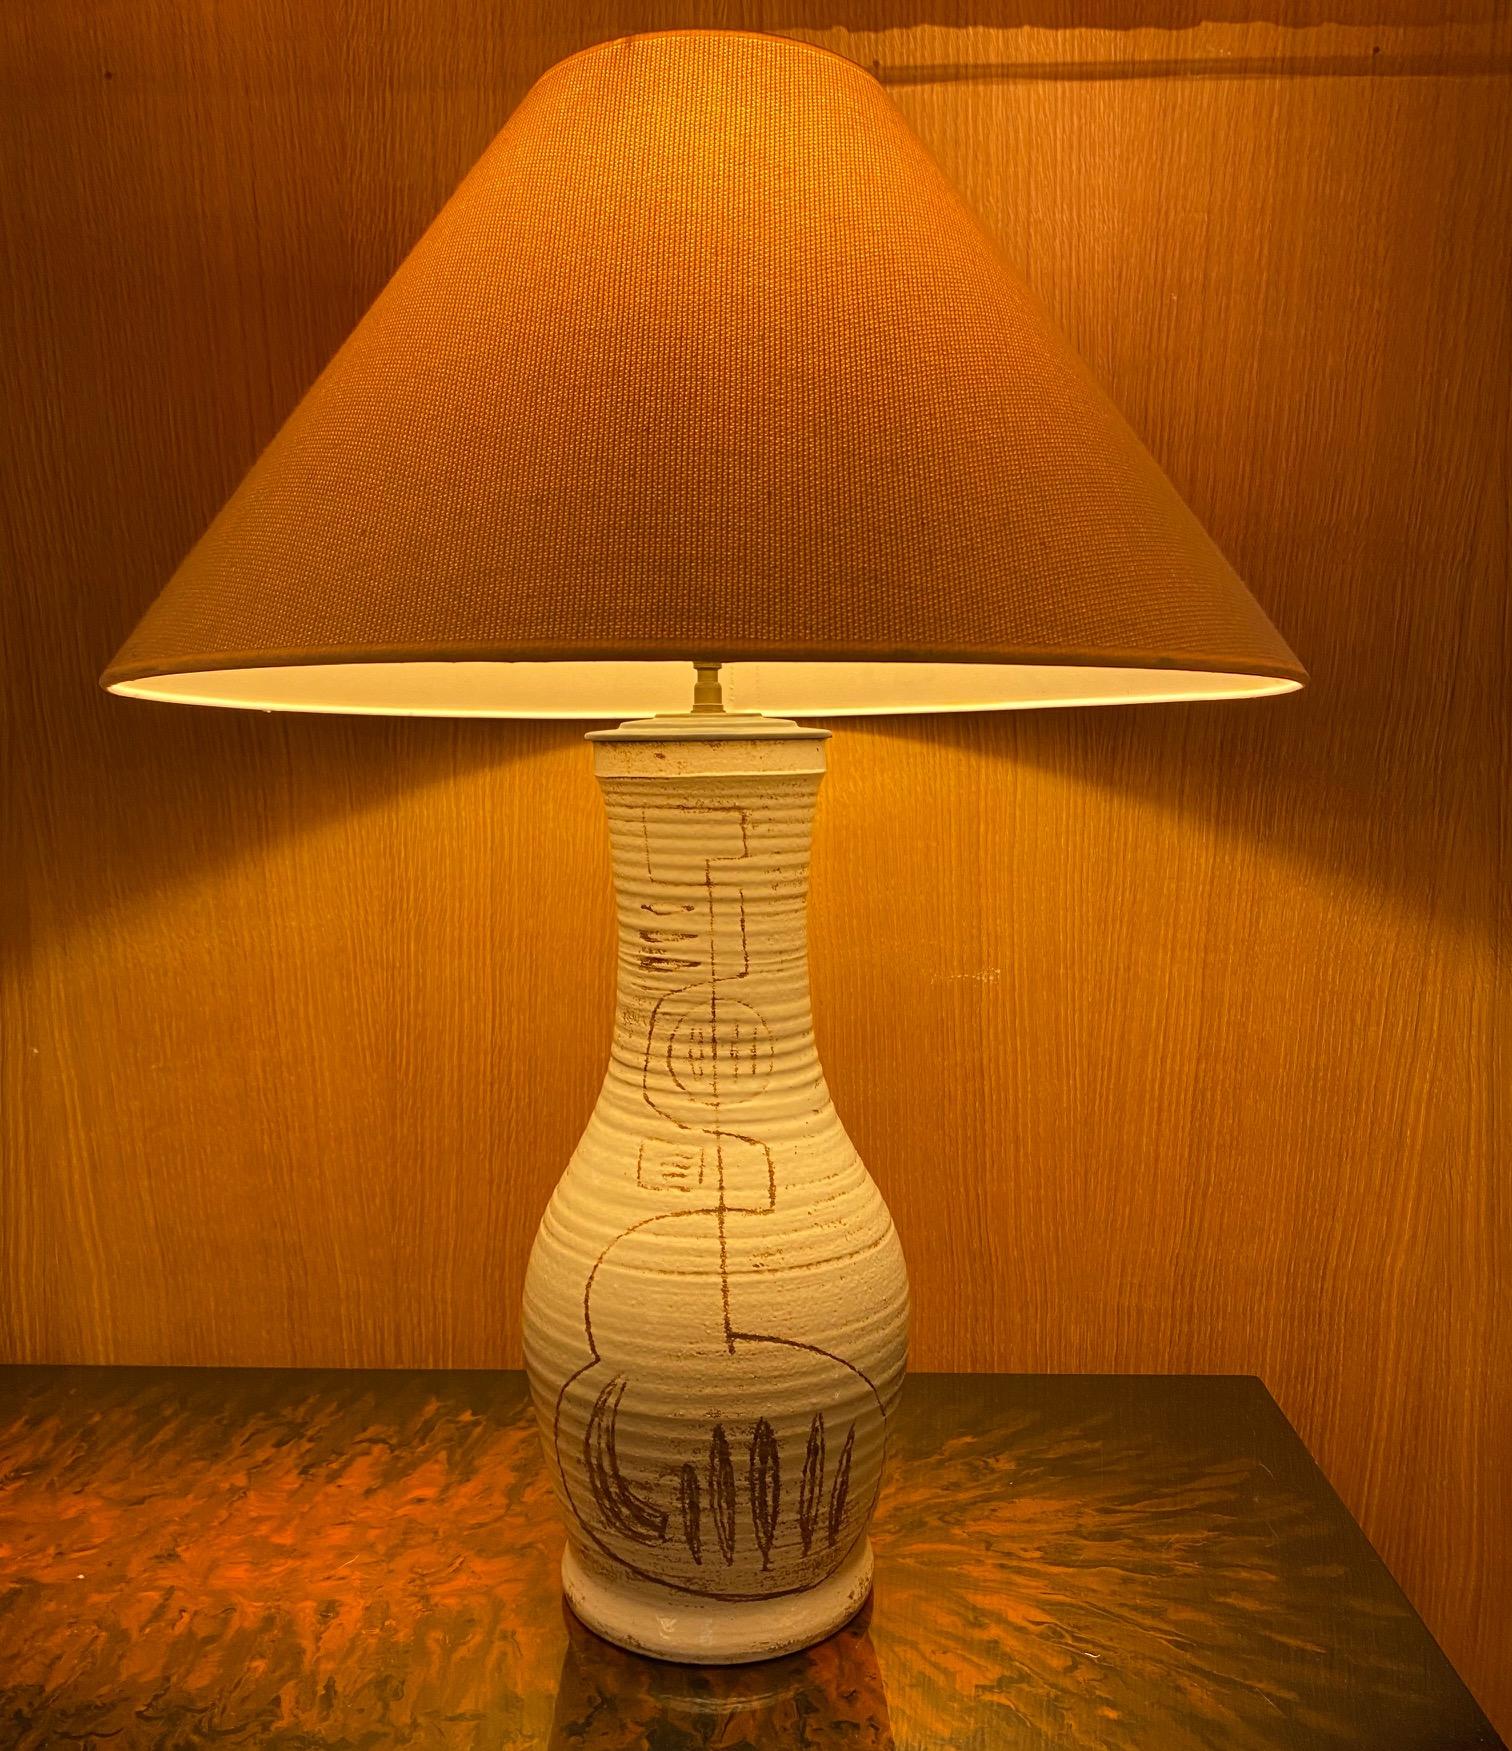 Ceramic Table Lamp, Accolay, France, 1960s
Accolay was a pottery center in France, north of Burgundy, founded amongst others, by 4 students of Alexandre Kostanda. Active between 1945 and 1989.